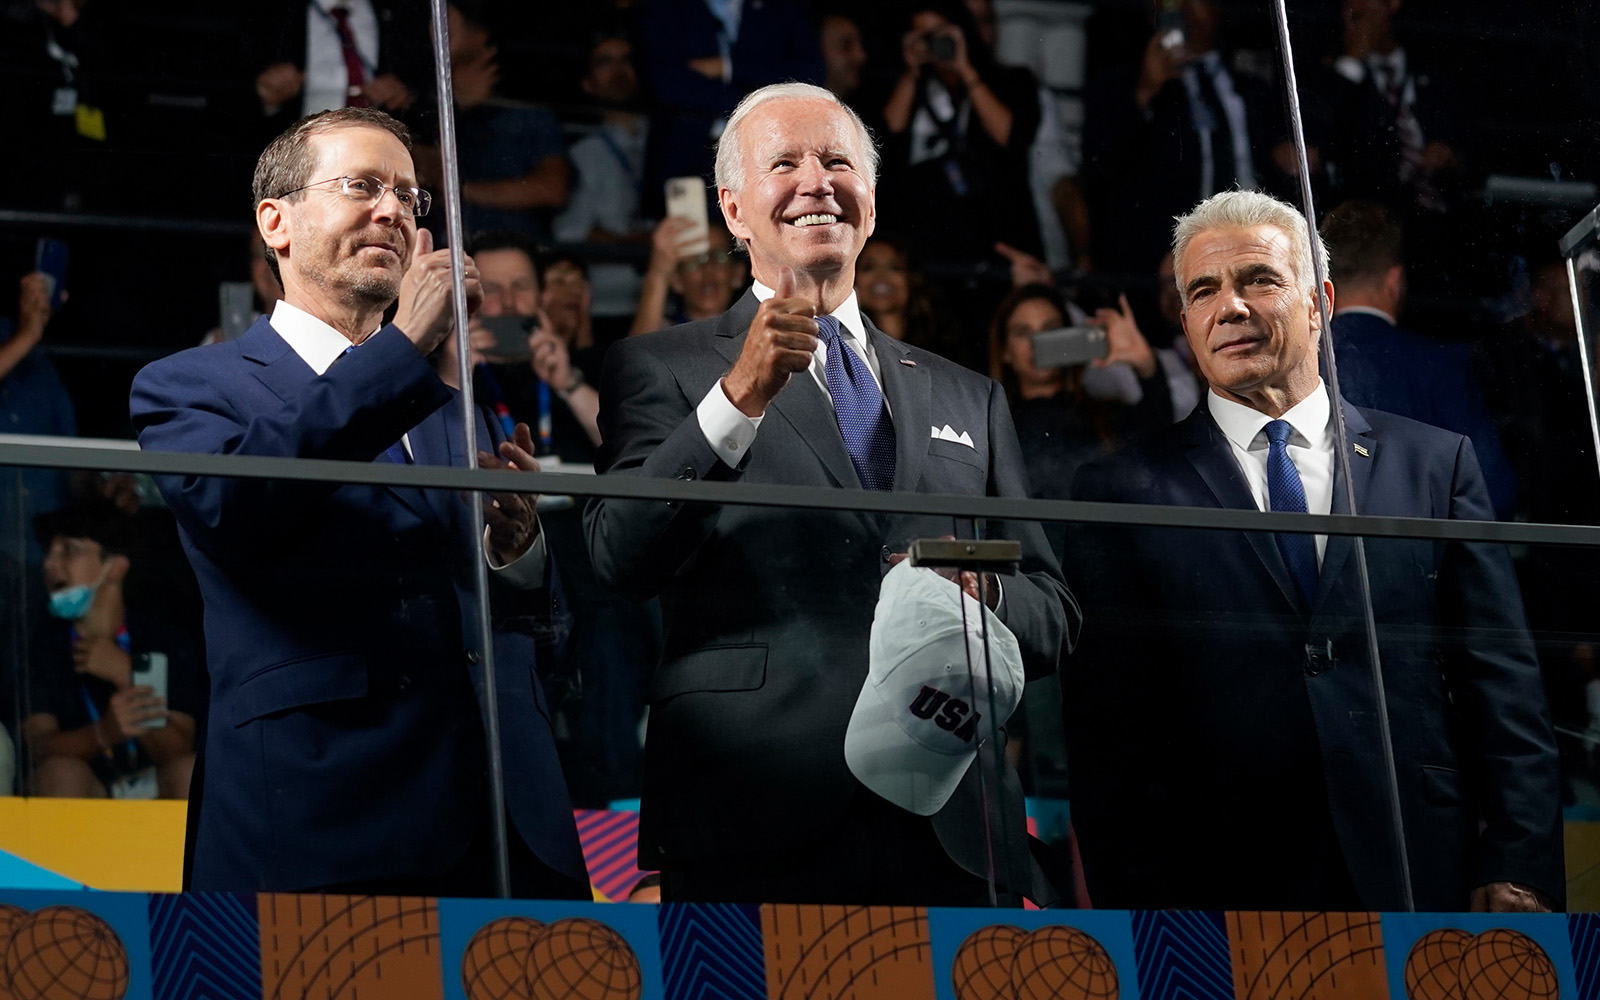 Signs with coded anti-Biden message removed from Dome during